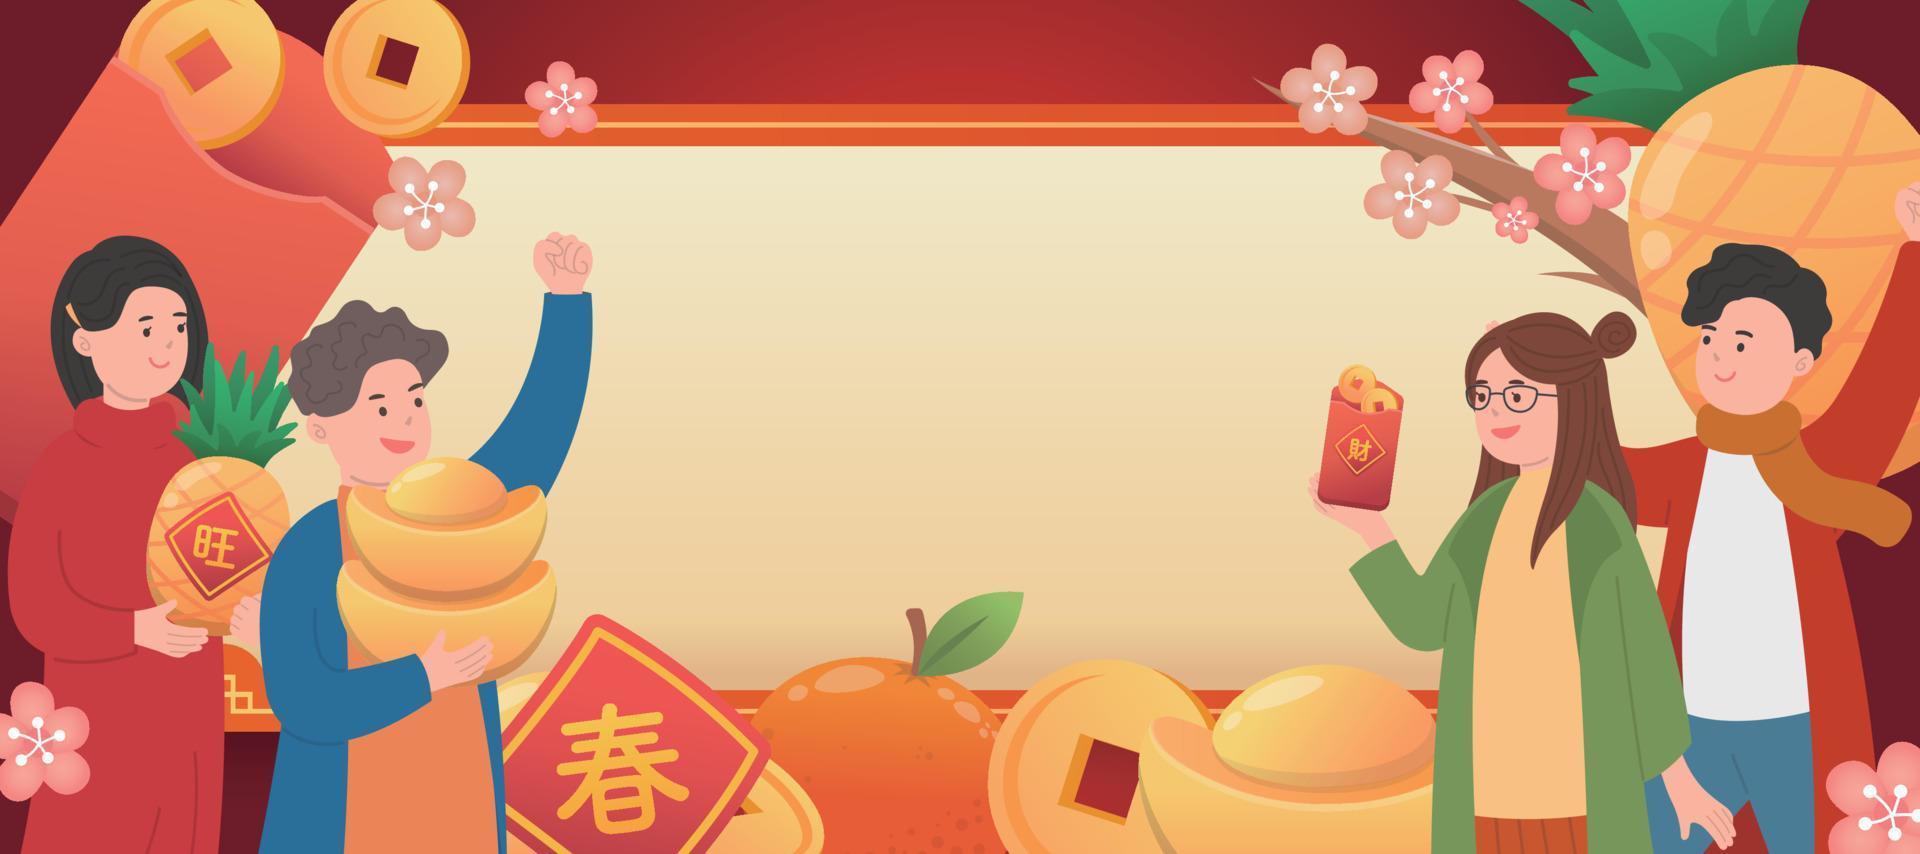 Poster celebrating Chinese New Year, happy people with gold coins and ingots and oranges and pineapples vector